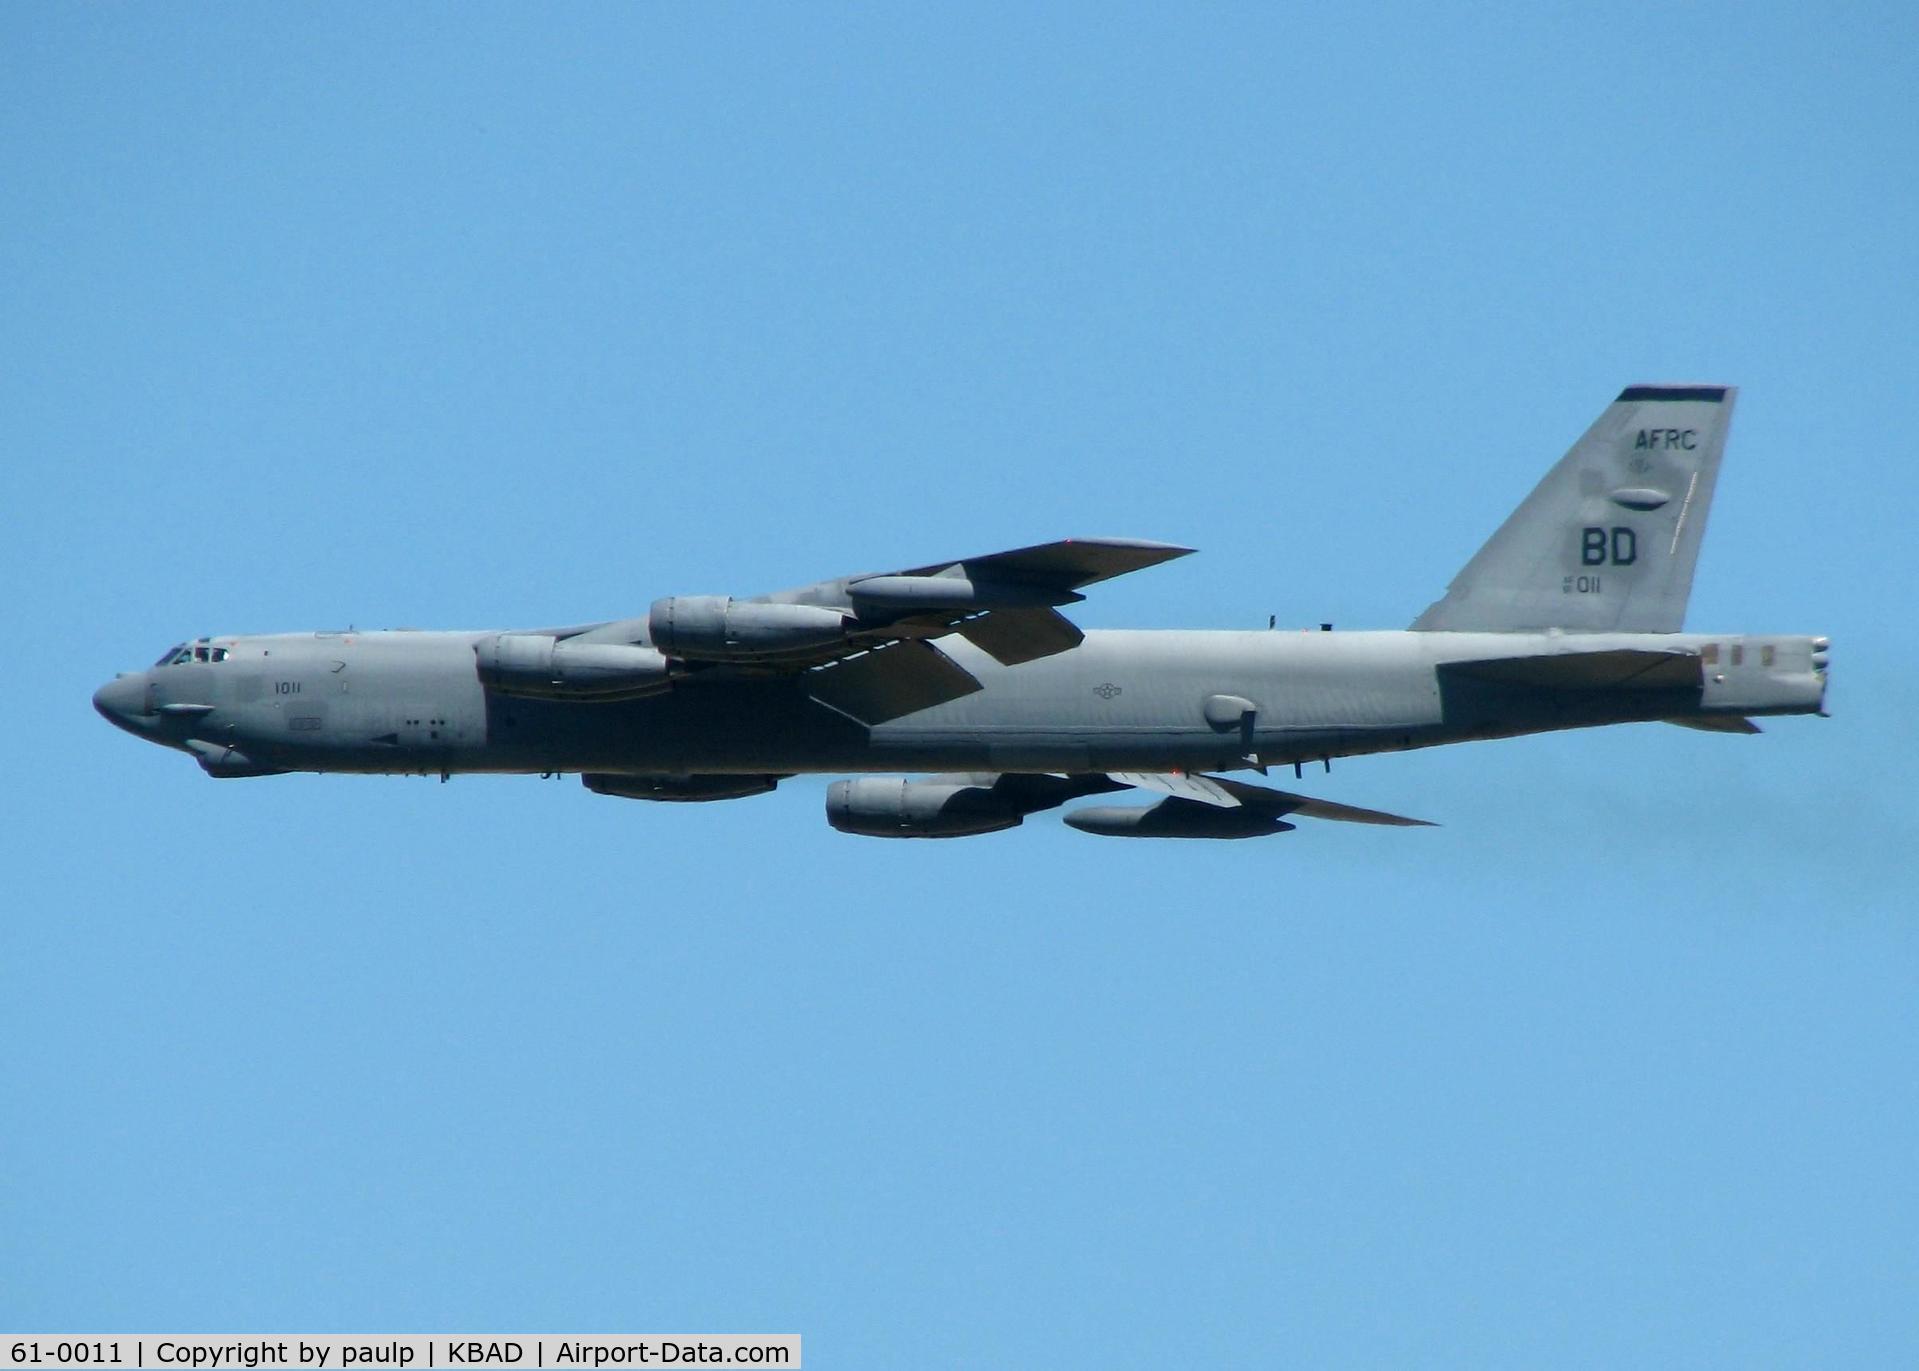 61-0011, 1961 Boeing B-52H Stratofortress C/N 464438, Off of Rwy 33 at Barksdale Air Force Base.